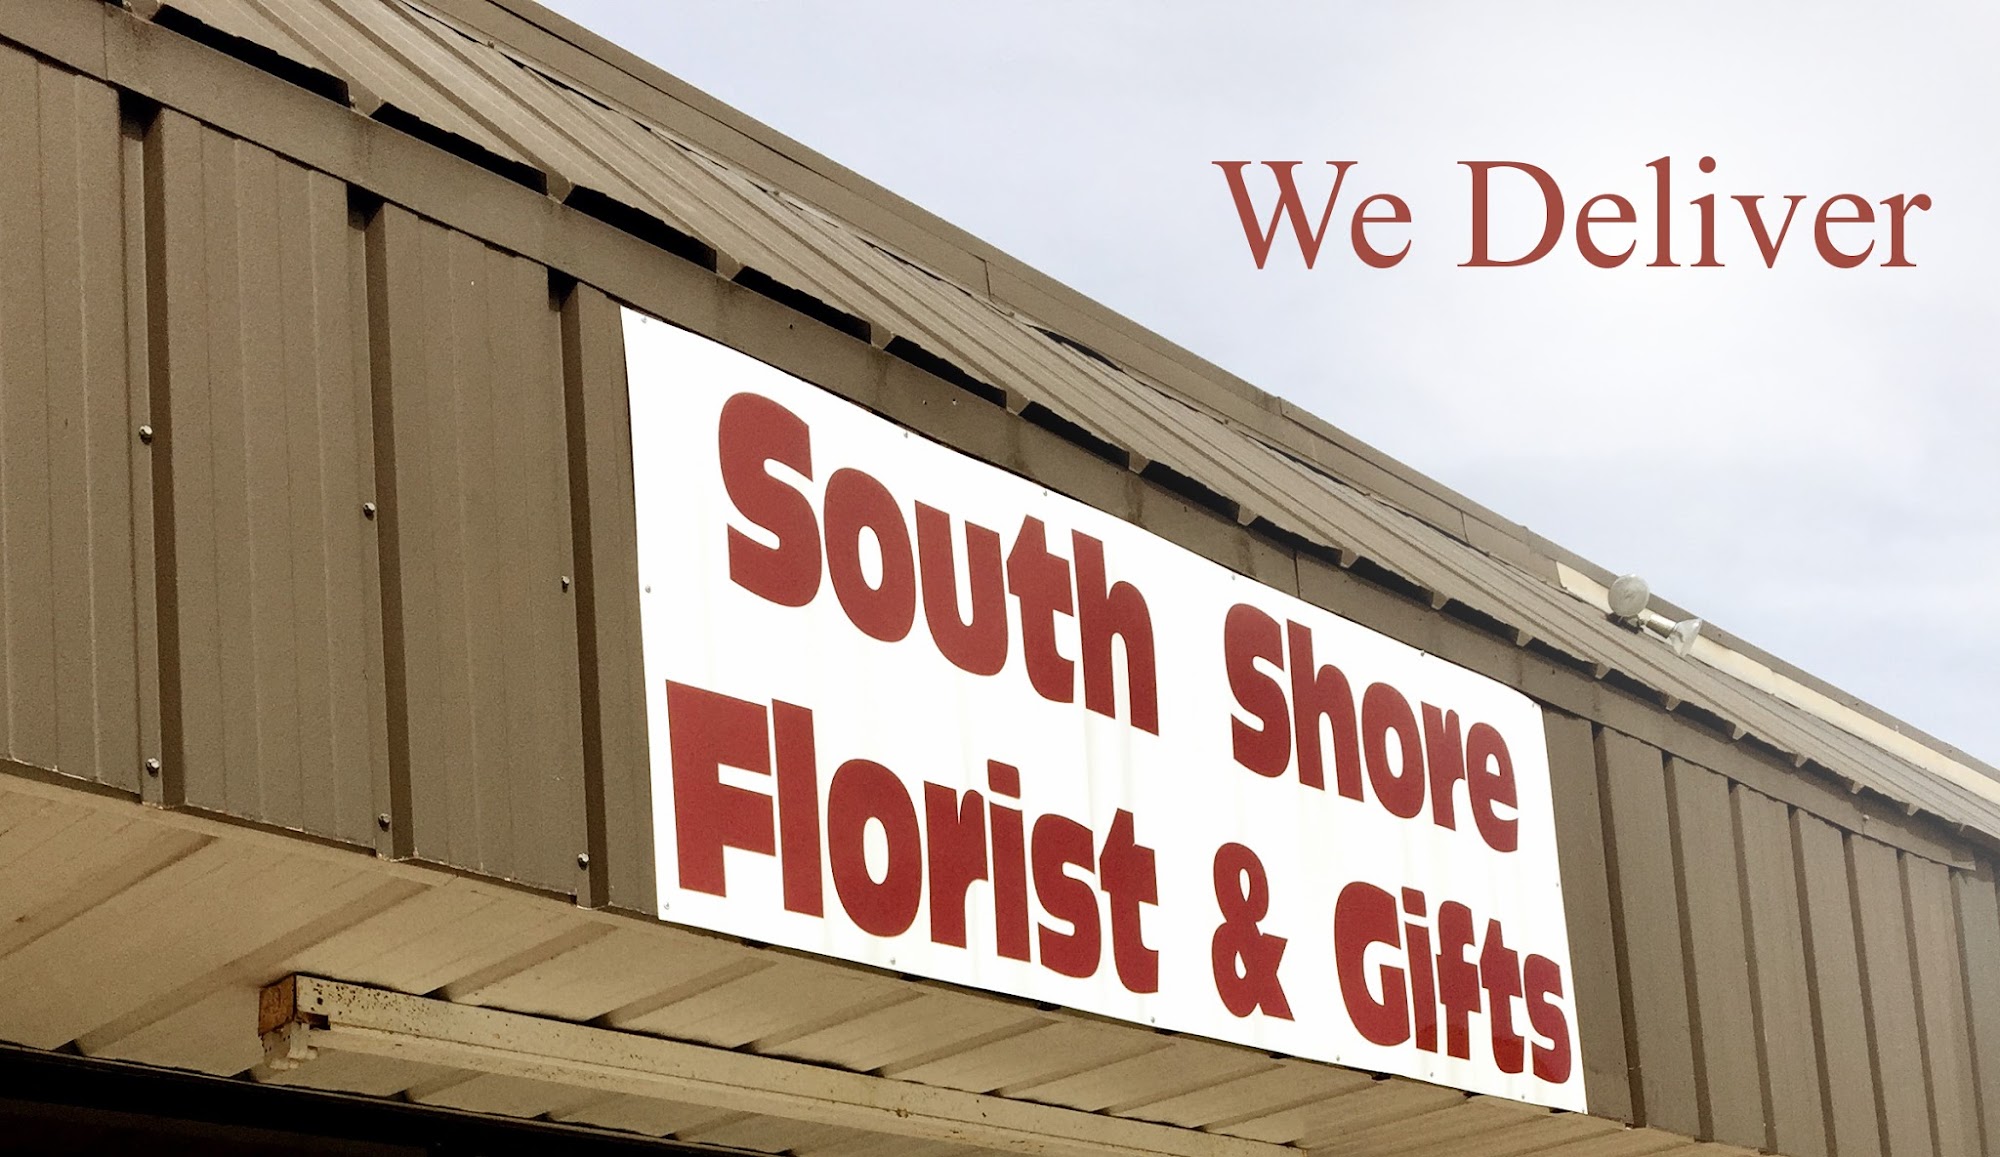 South Shore Florist and Gifts 62 Plaza Dr, South Shore Kentucky 41175